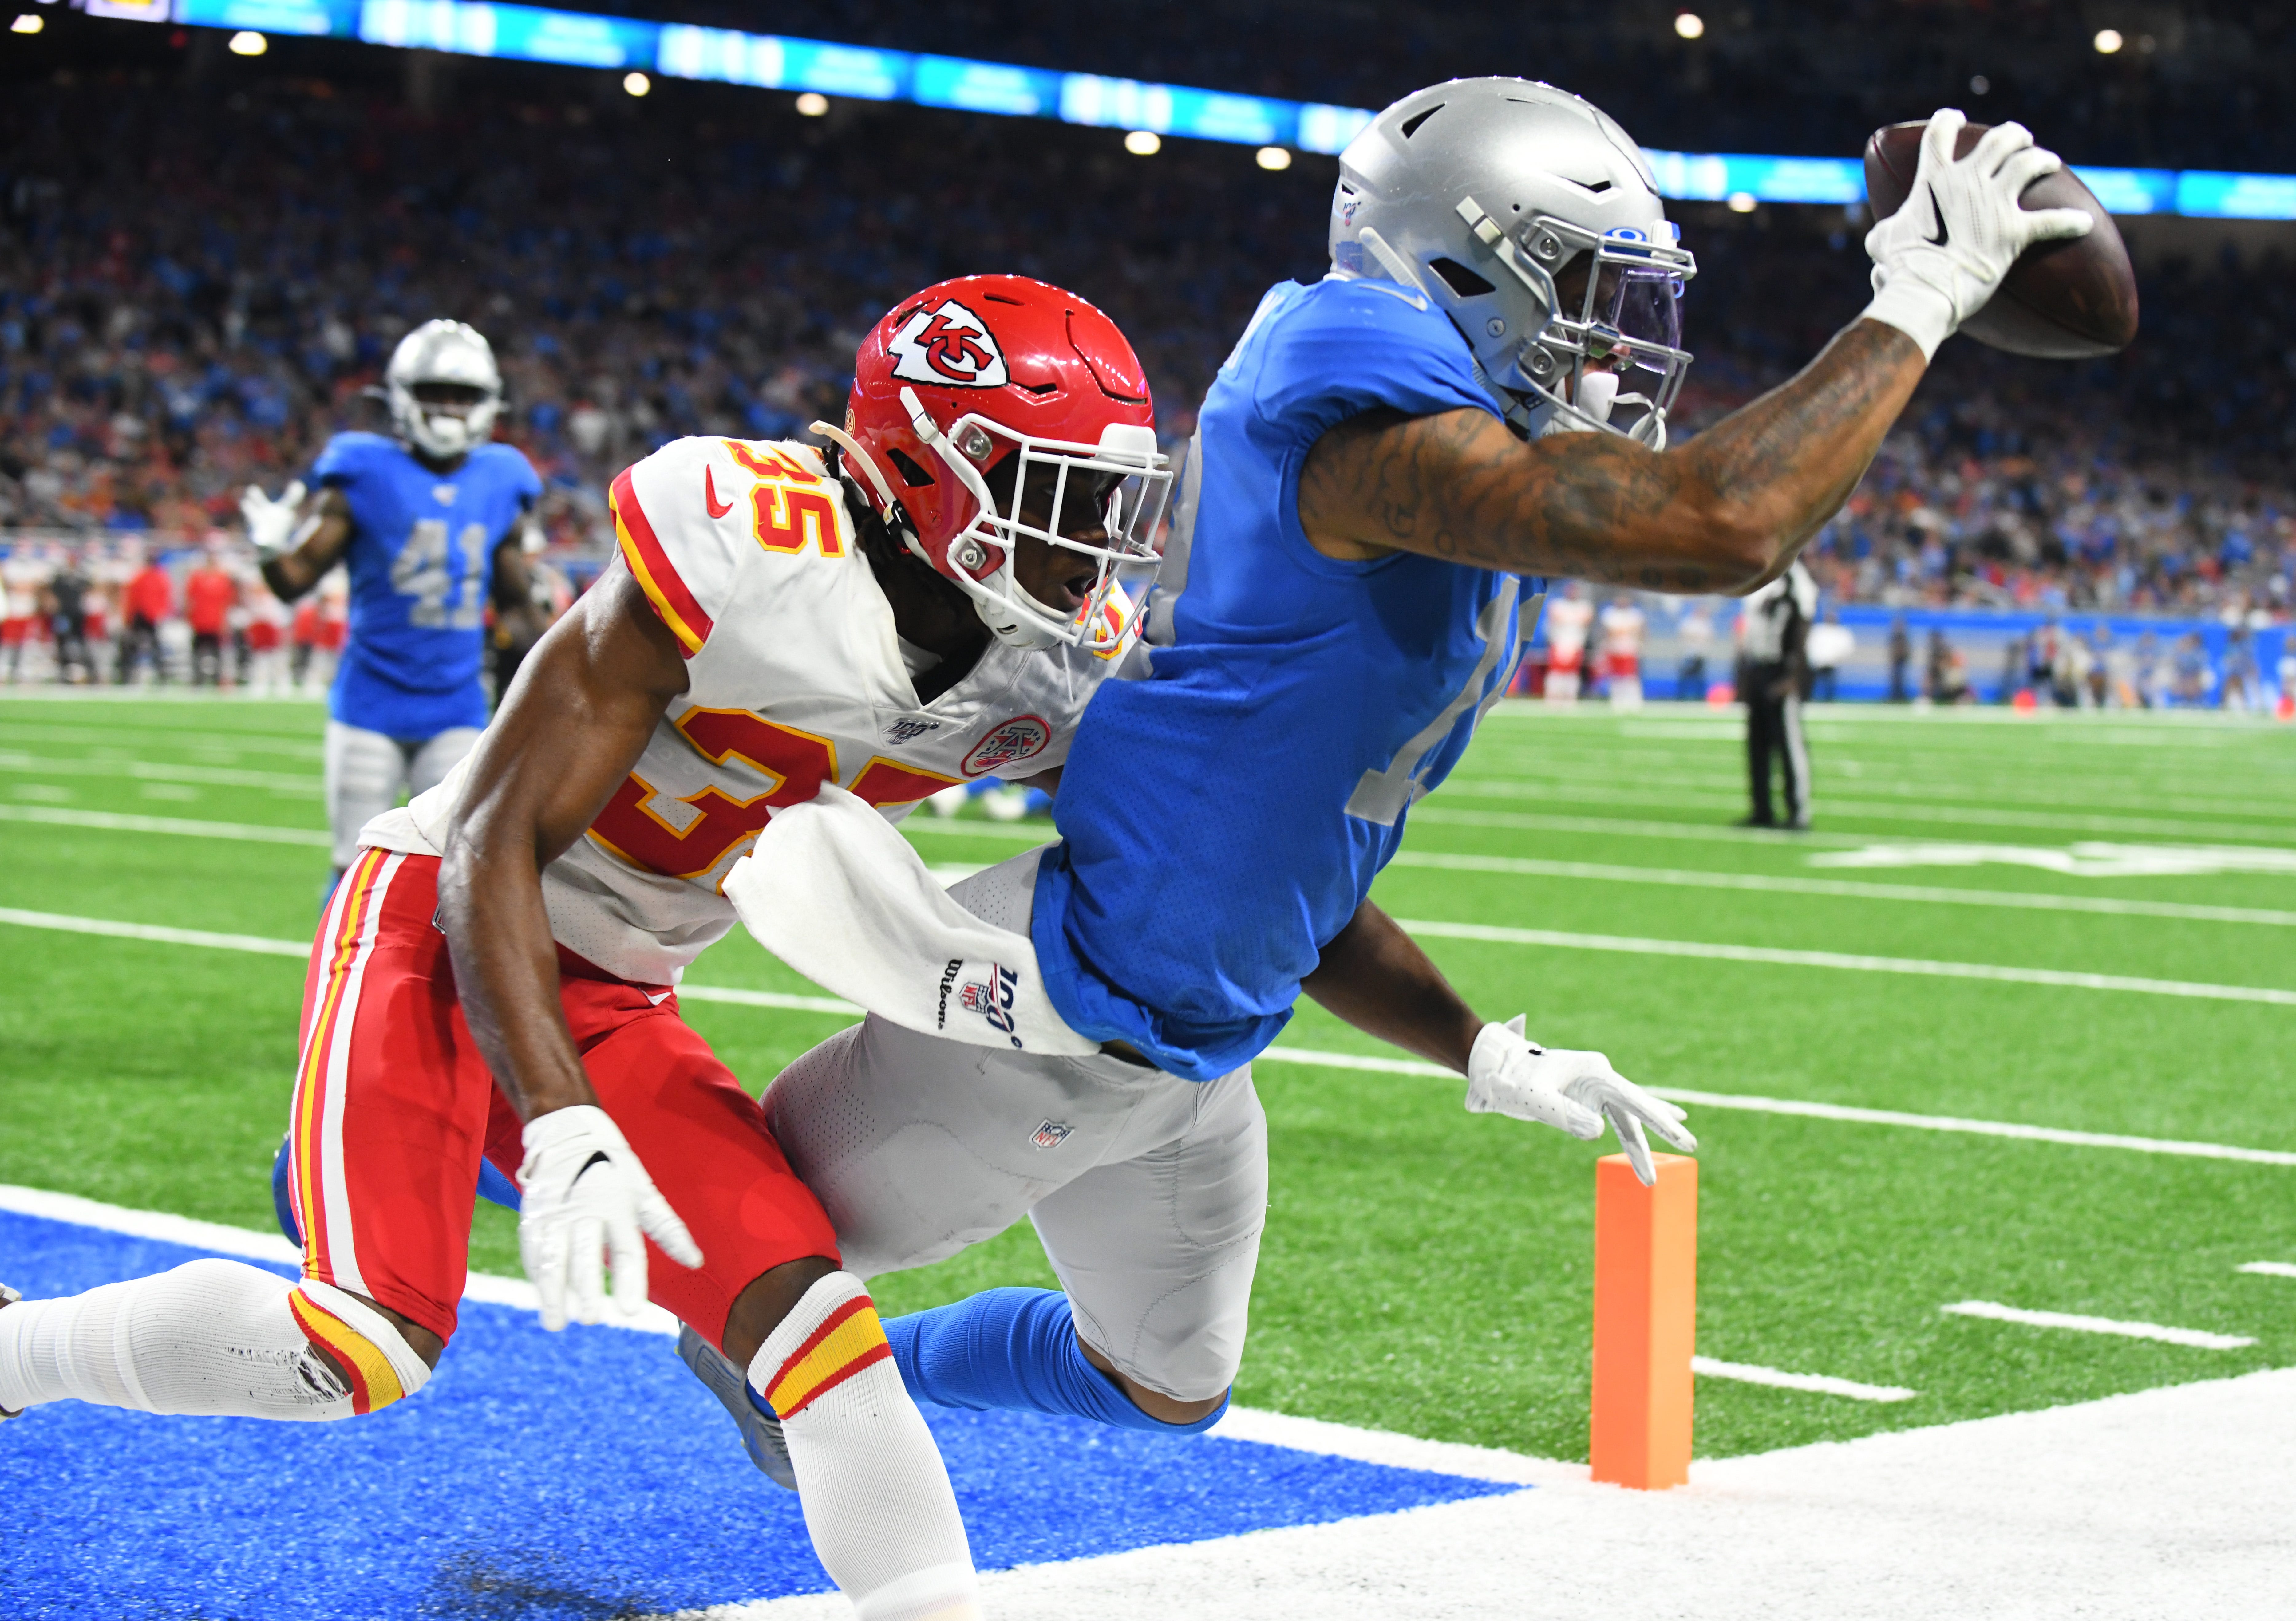 Lions' Kenny Golladay hangs onto a touchdown reception in front of Chiefs' Charvarius Ward late in the fourth quarter on Sunday.